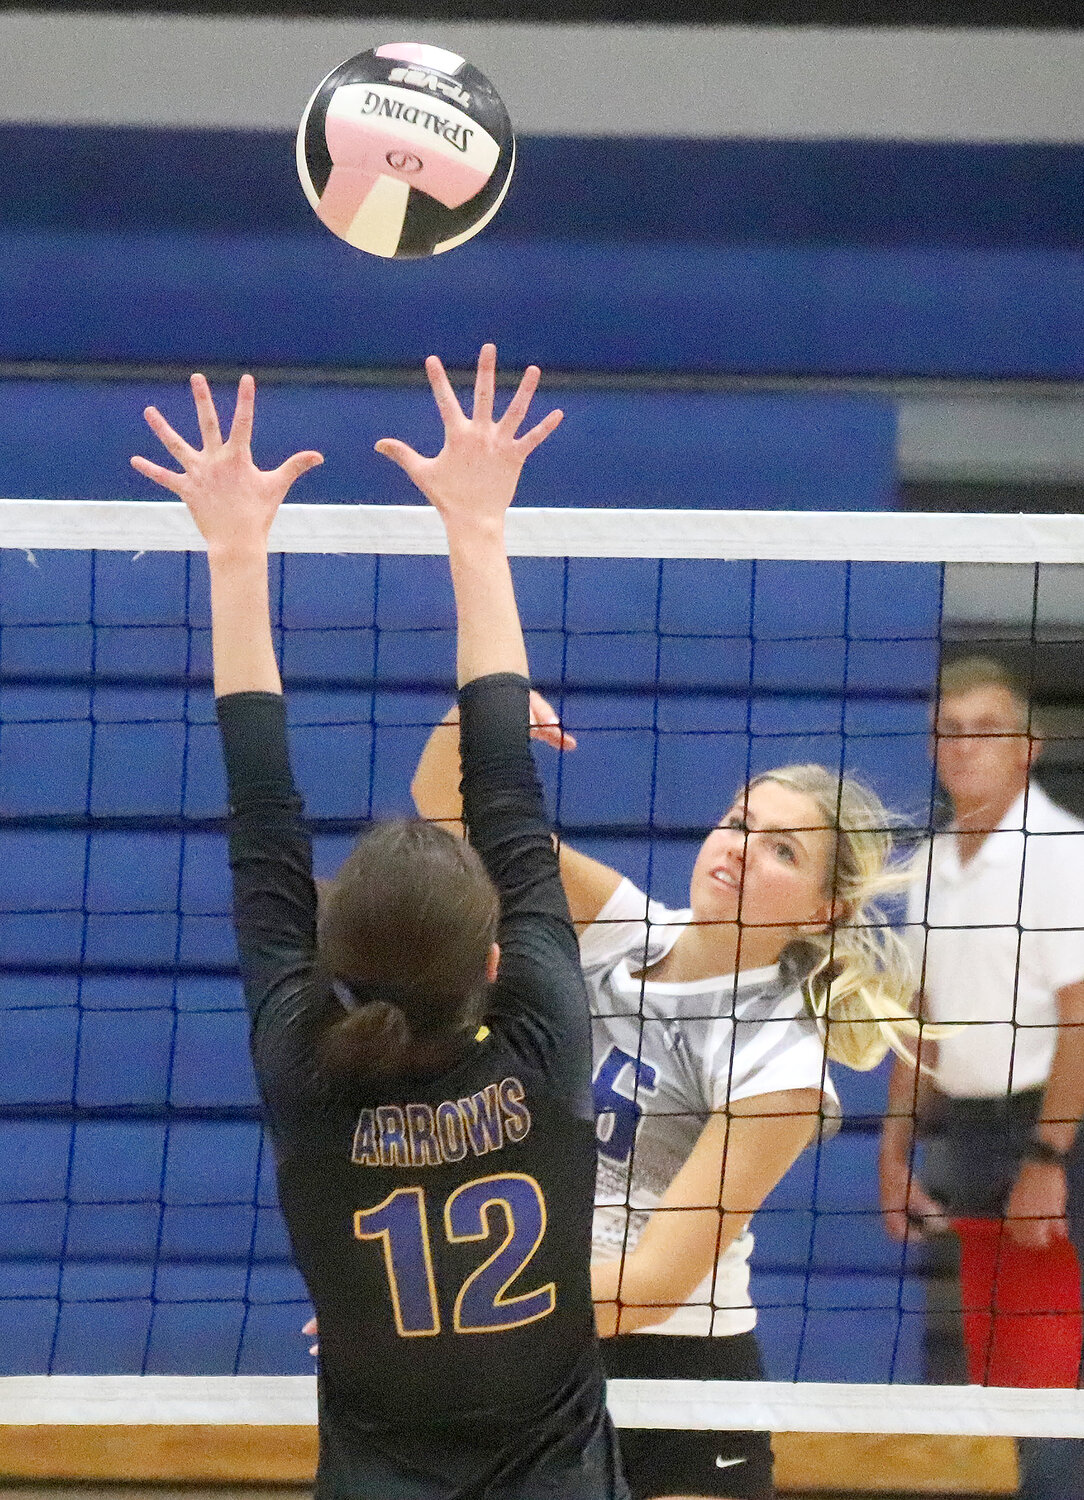 Holy Trinity Catholic's Taegan Dennings attacks over a Wapello defender Monday night in the title match of the Crusaders' HTC Classic at Shottenkirk Gym. The Crusaders won going 4-0 on the night.